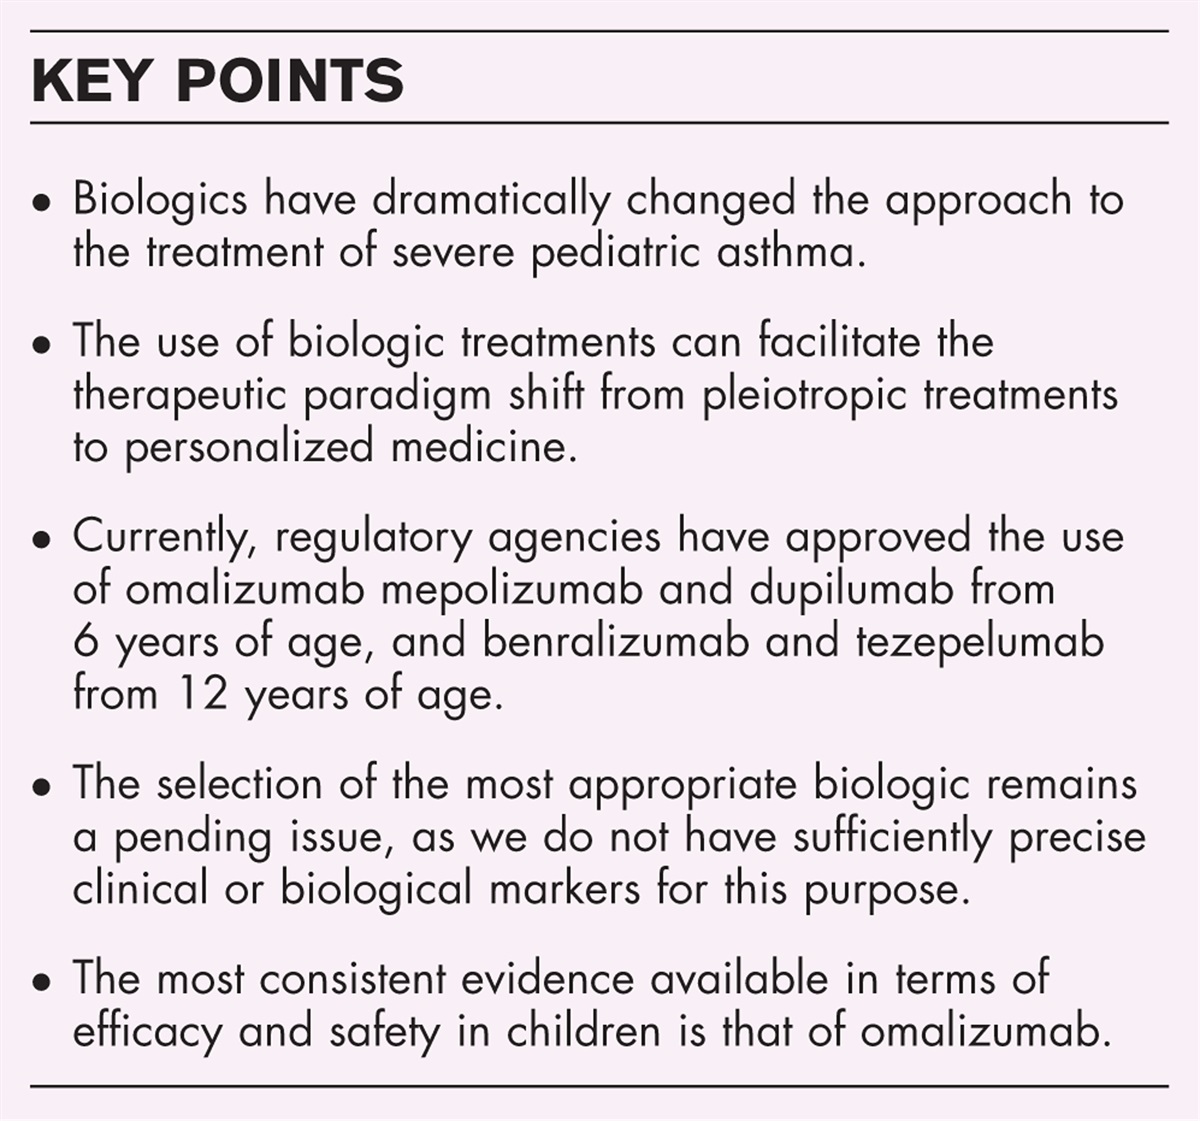 Biological treatments in childhood asthma